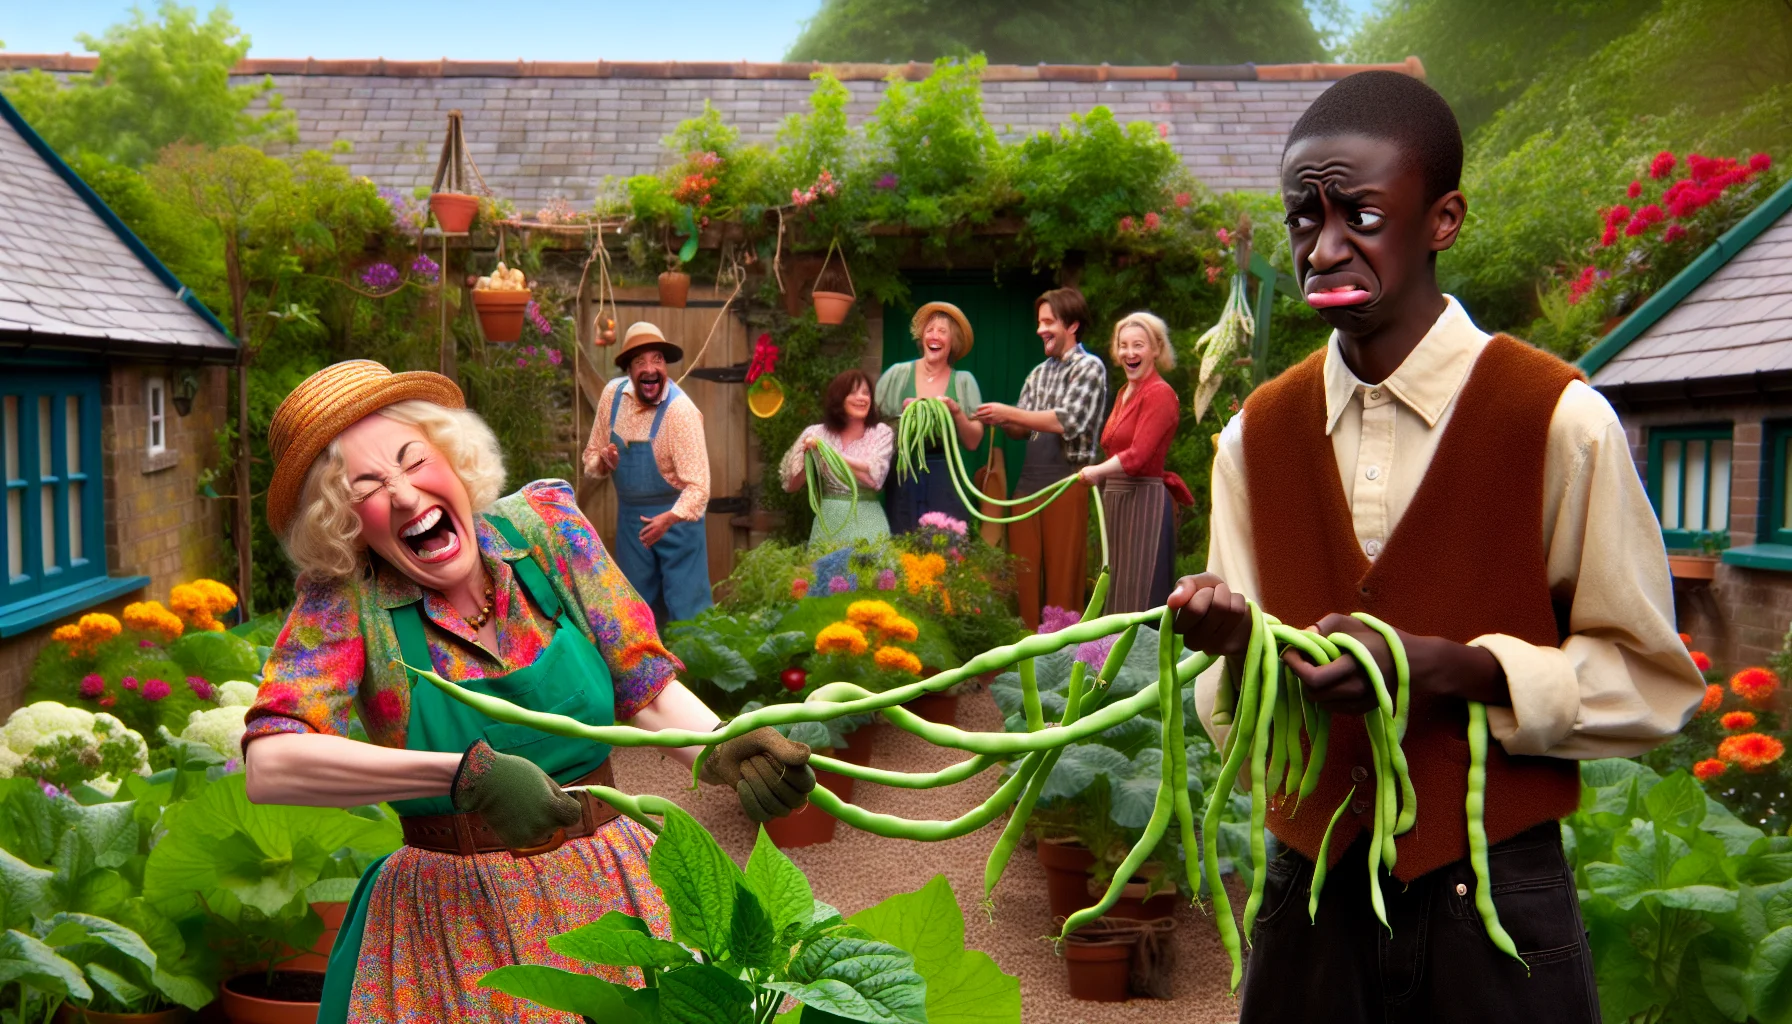 Picture a whimsical, humorous gardening scene. In this tableau, a mid-aged Caucasian woman, dressed in vibrant gardening attire, stands laughing while she attempts to string together a line of lively green beans. Opposite her, a Black teenager, wearing a dubious expression, holds the other end of the exuberantly sprouting bean line. Surrounding them, a lush and bountiful garden blooms with an array of colourful plants and vegetables, adding a scenic backdrop to the interesting task at hand. Their jovial expressions and the quirky scene therein, instills a joyful and inviting ambiance encouraging everyone to take part in gardening.